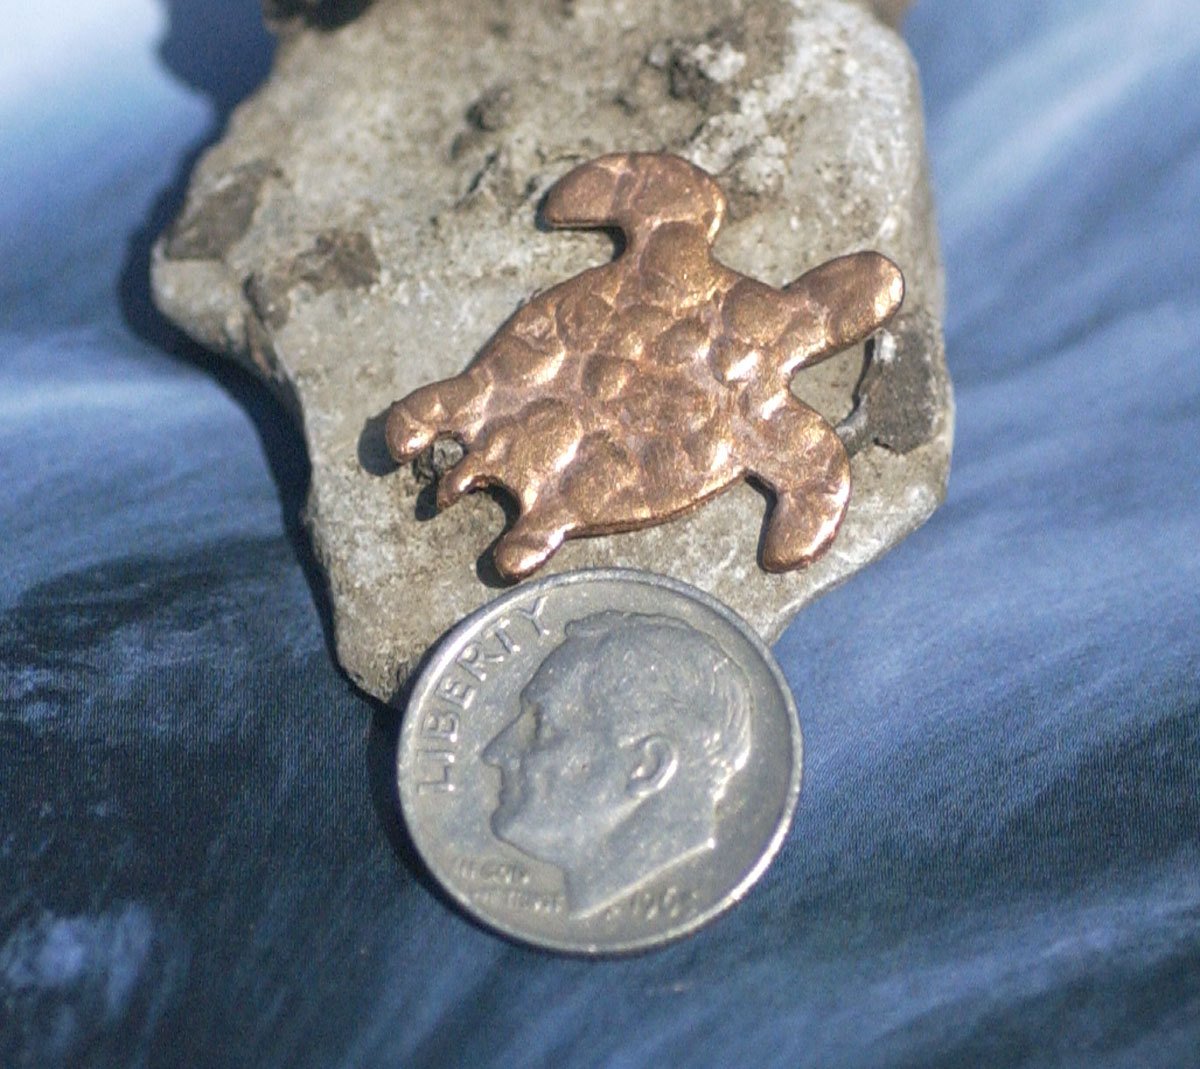 Antique Hammered Turtle 20mm x 23mm for Blanks Enameling Stamping Texturing Variety of Metals